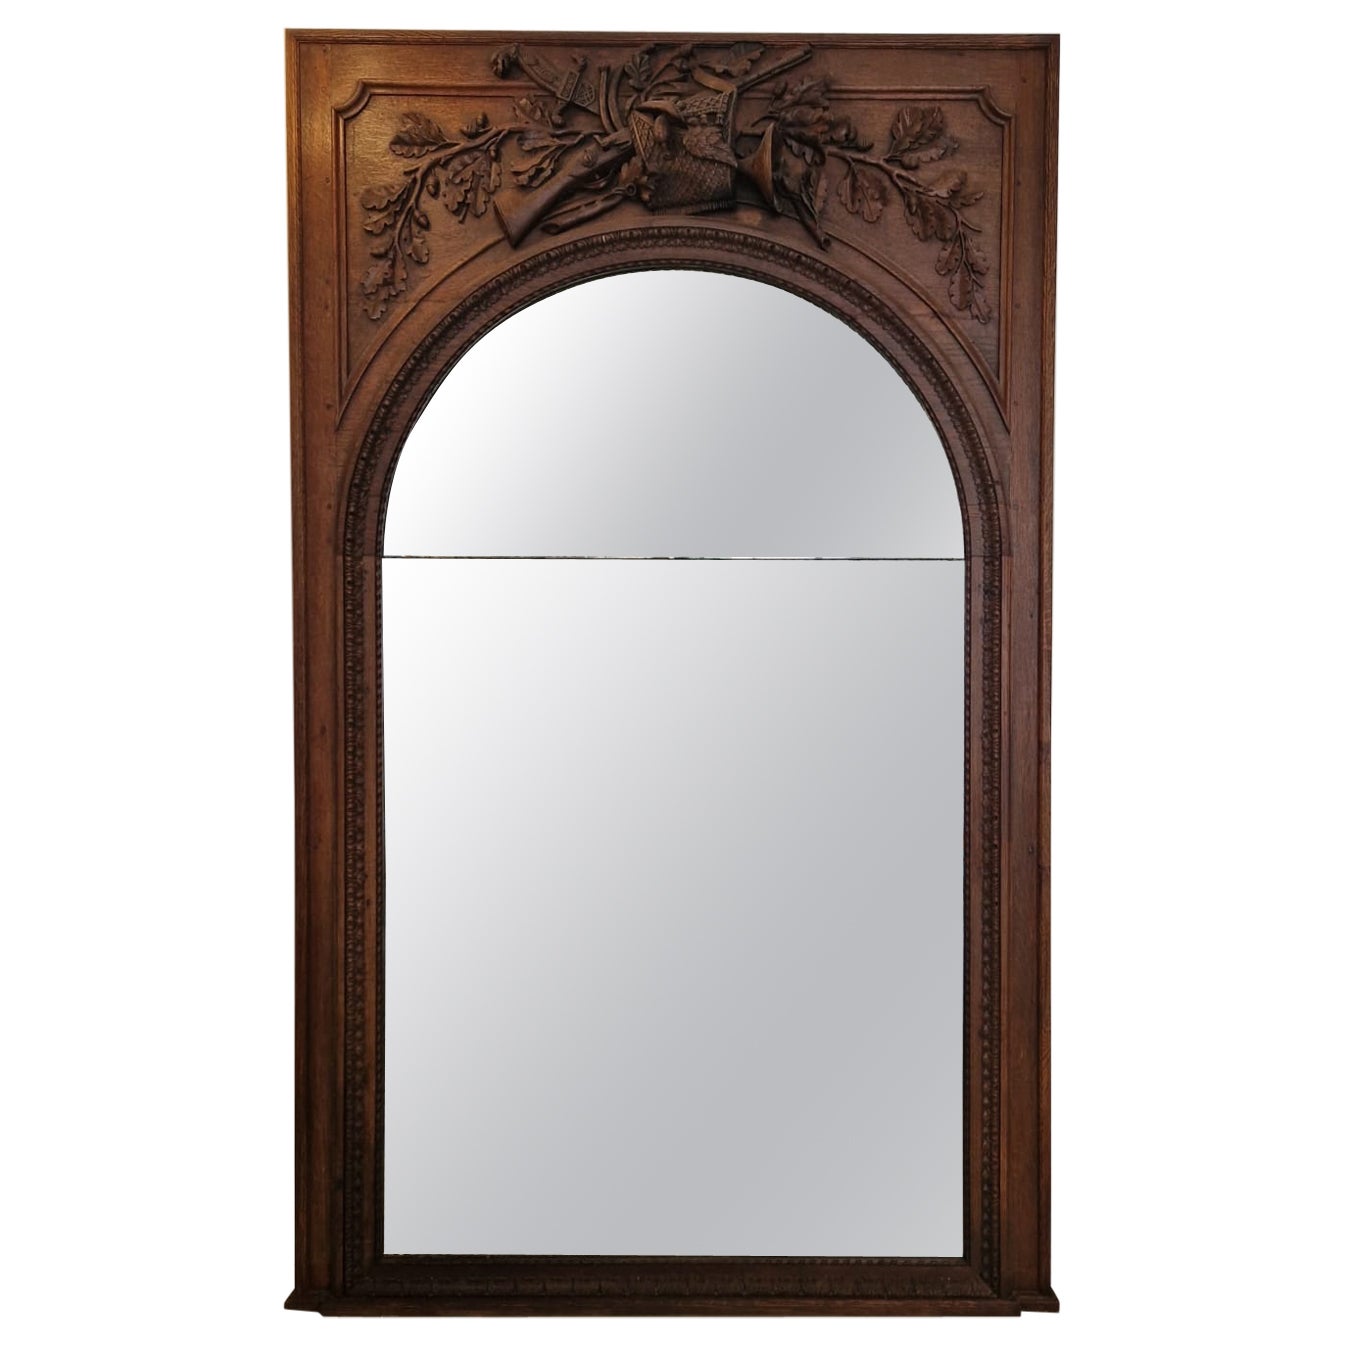 Trumeau Mirror carved wood 19th century